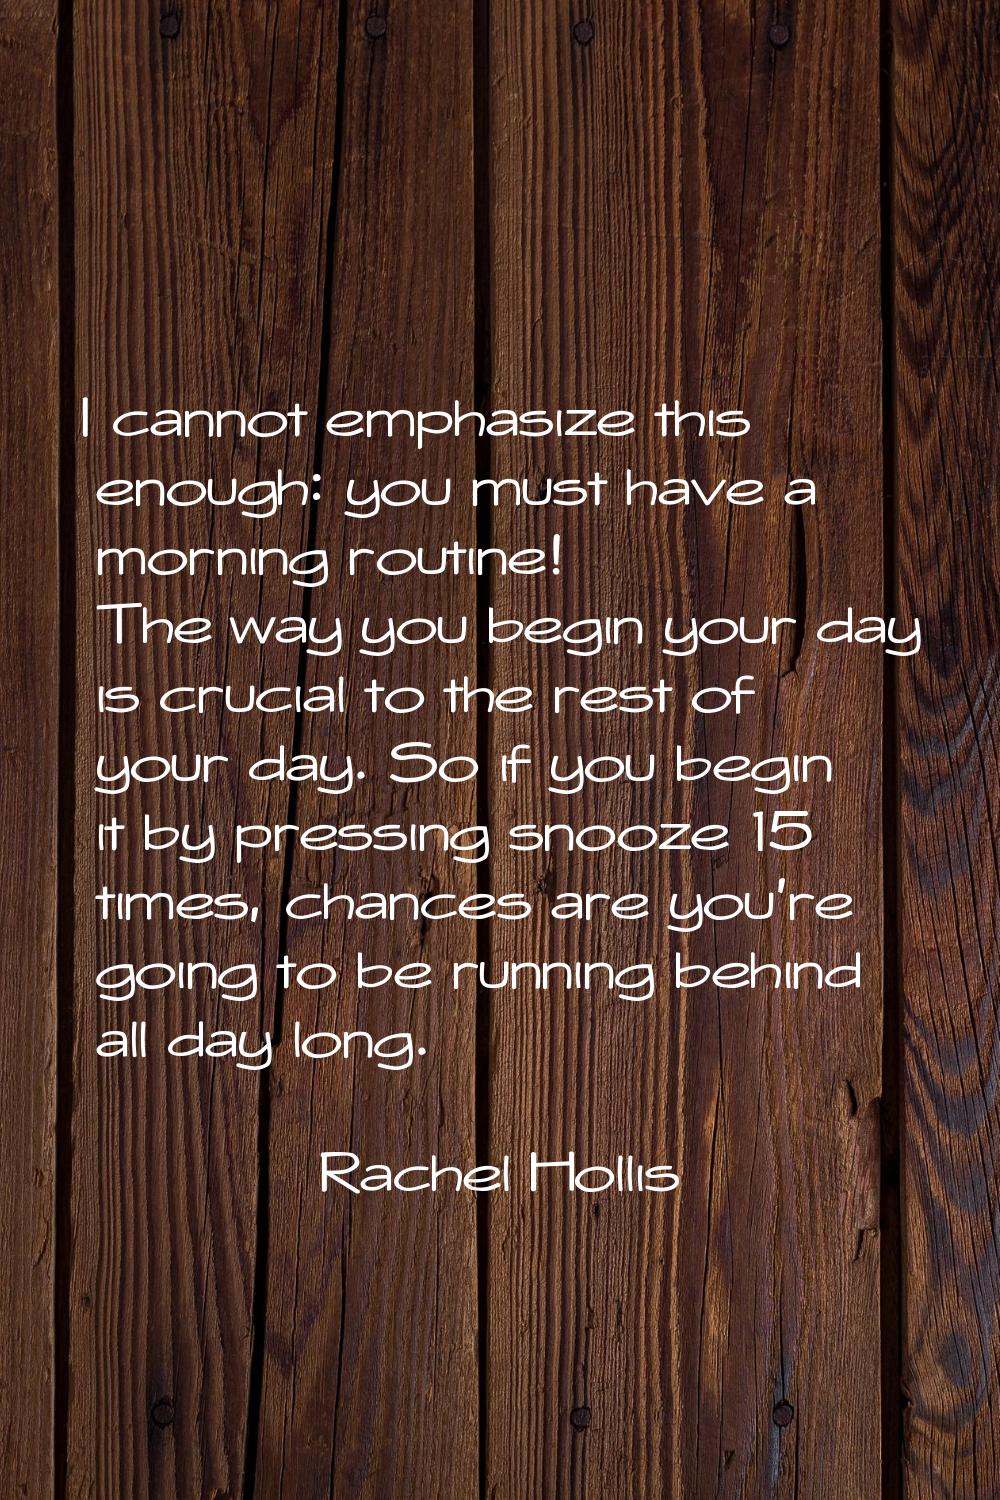 I cannot emphasize this enough: you must have a morning routine! The way you begin your day is cruc